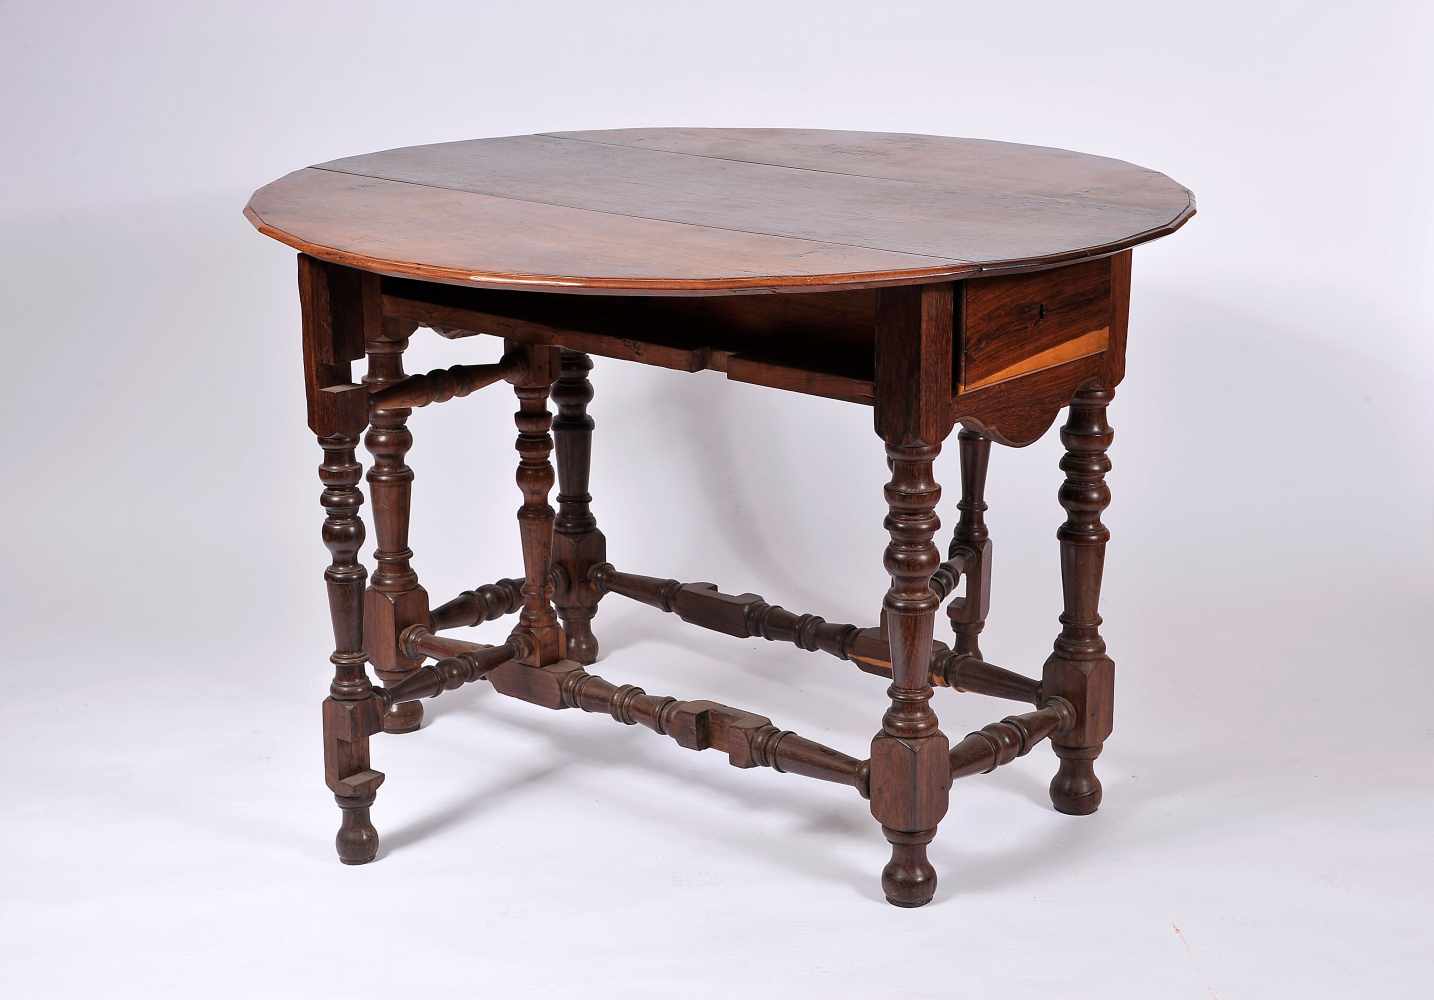 A Gate Leg Table with Two Drawers, Brazilian rosewood, multi-faceted edge top, turned legs and - Image 2 of 2